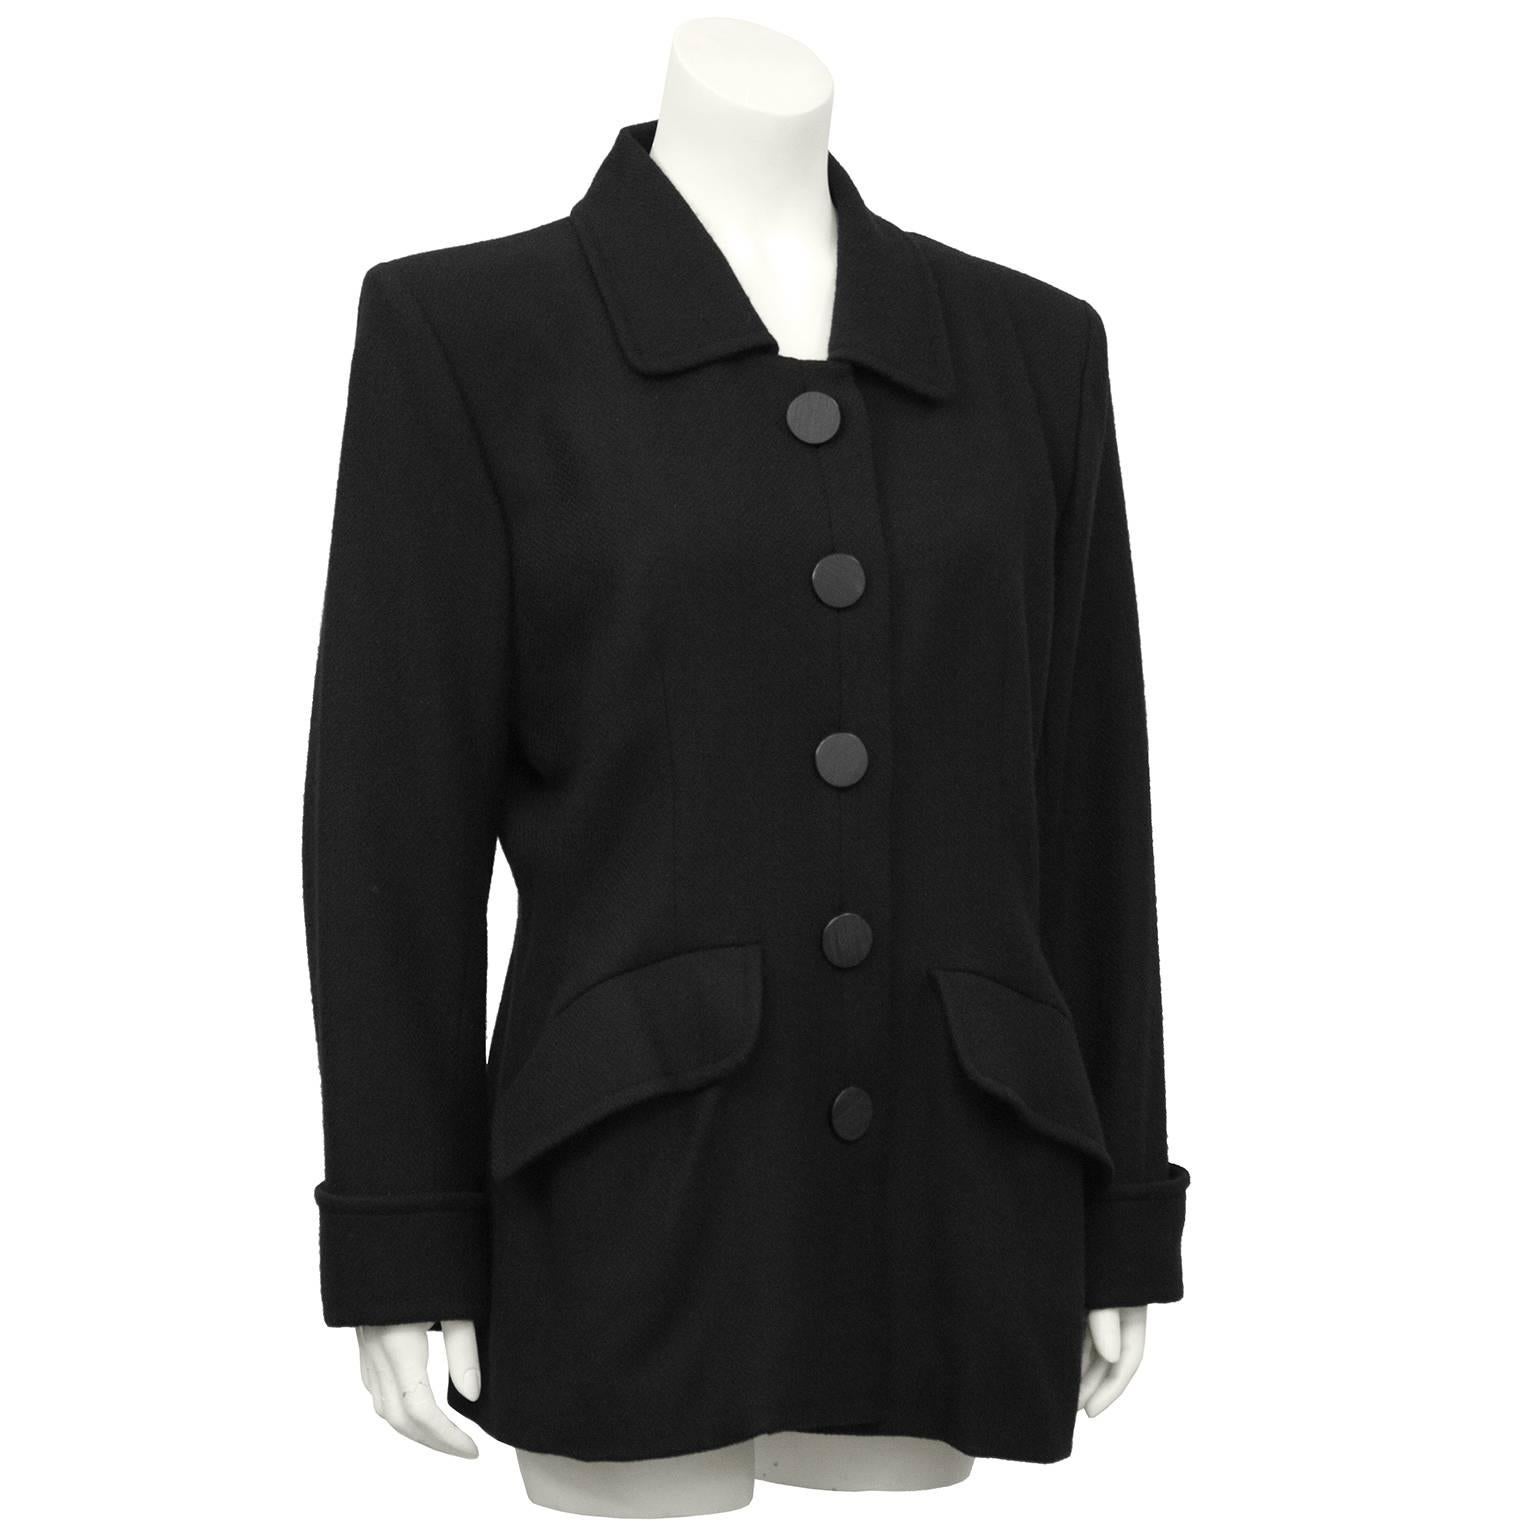 1980's Yves Saint Laurent black cashmere and wool blazer with large flat black buttons and chic oversized pockets fitted through the waist. Classic blazer that can be worn casually, or dressed with skinny jeans and killer black pumps. Excellent